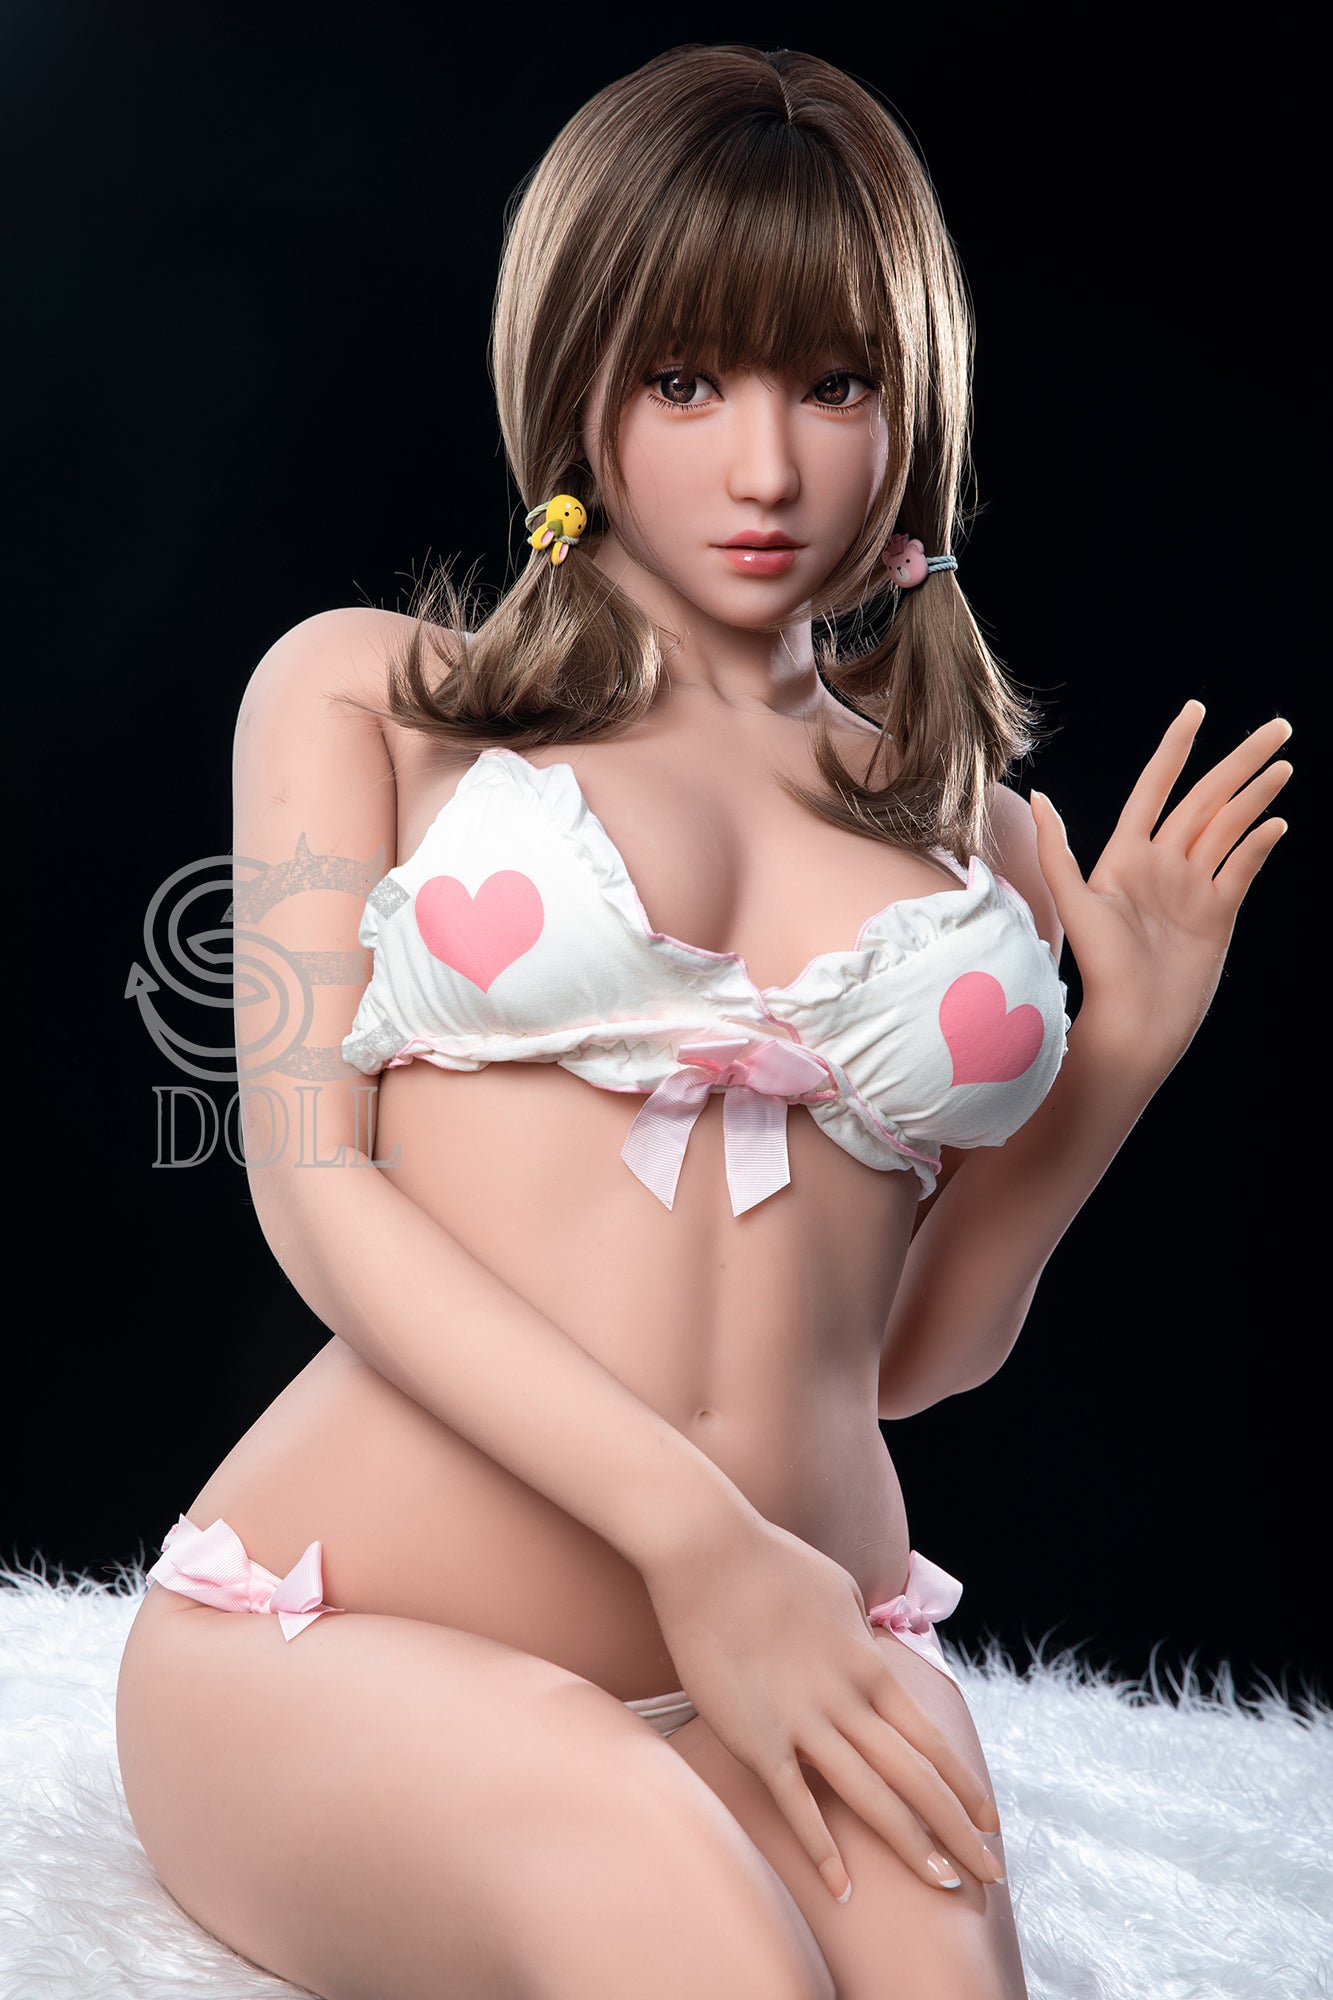 Teenager realistic sex doll